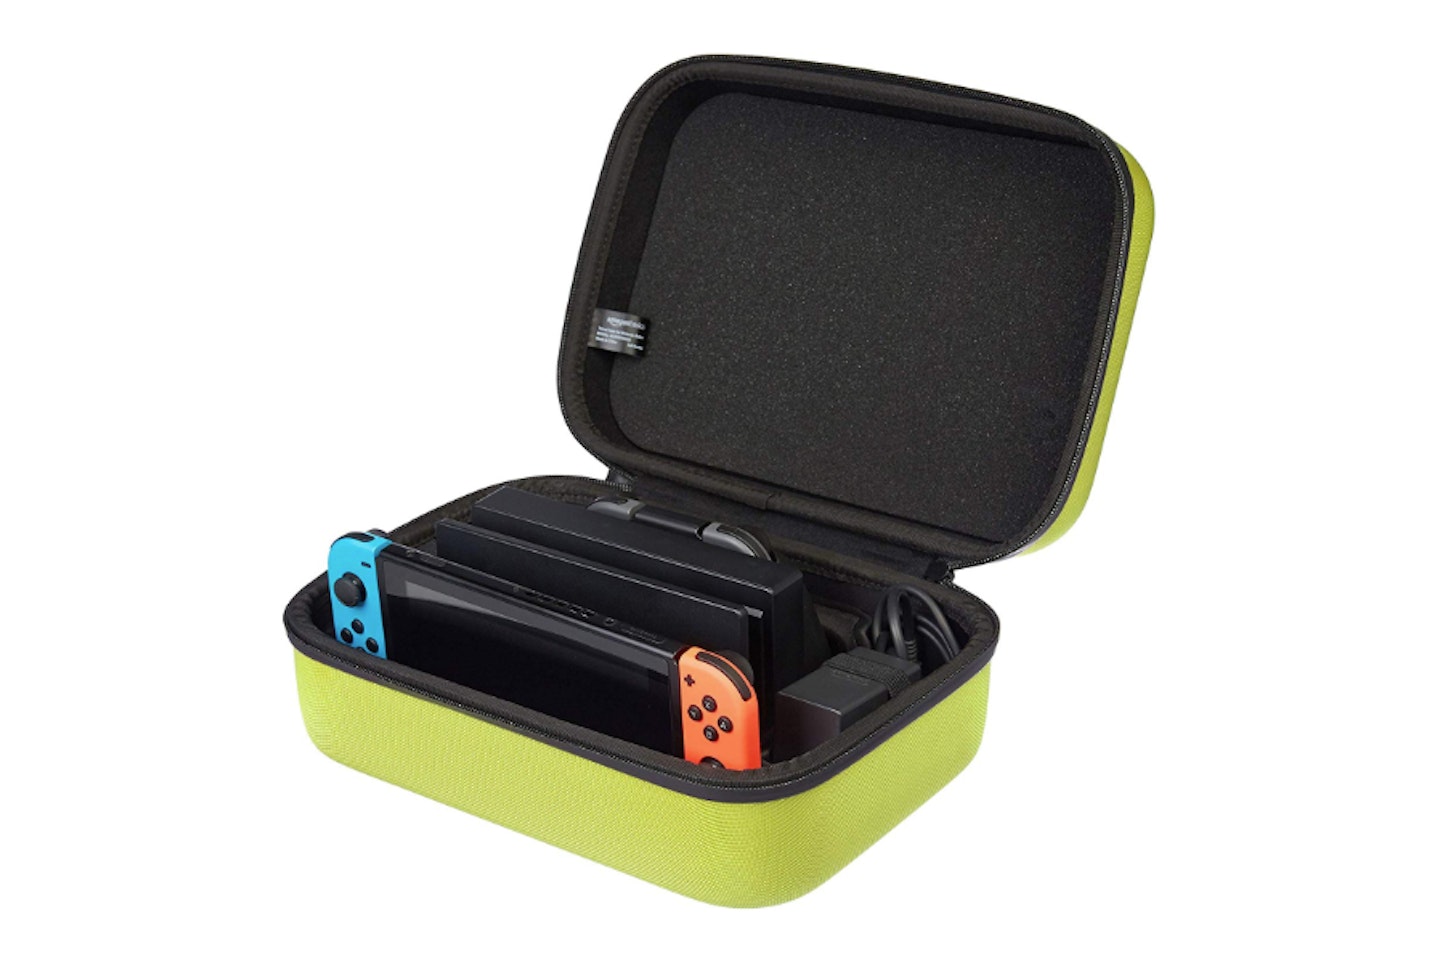 Travel and Storage Case for Nintendo Switch, Neon Yellow, WAS £17.99 NOW £9.13